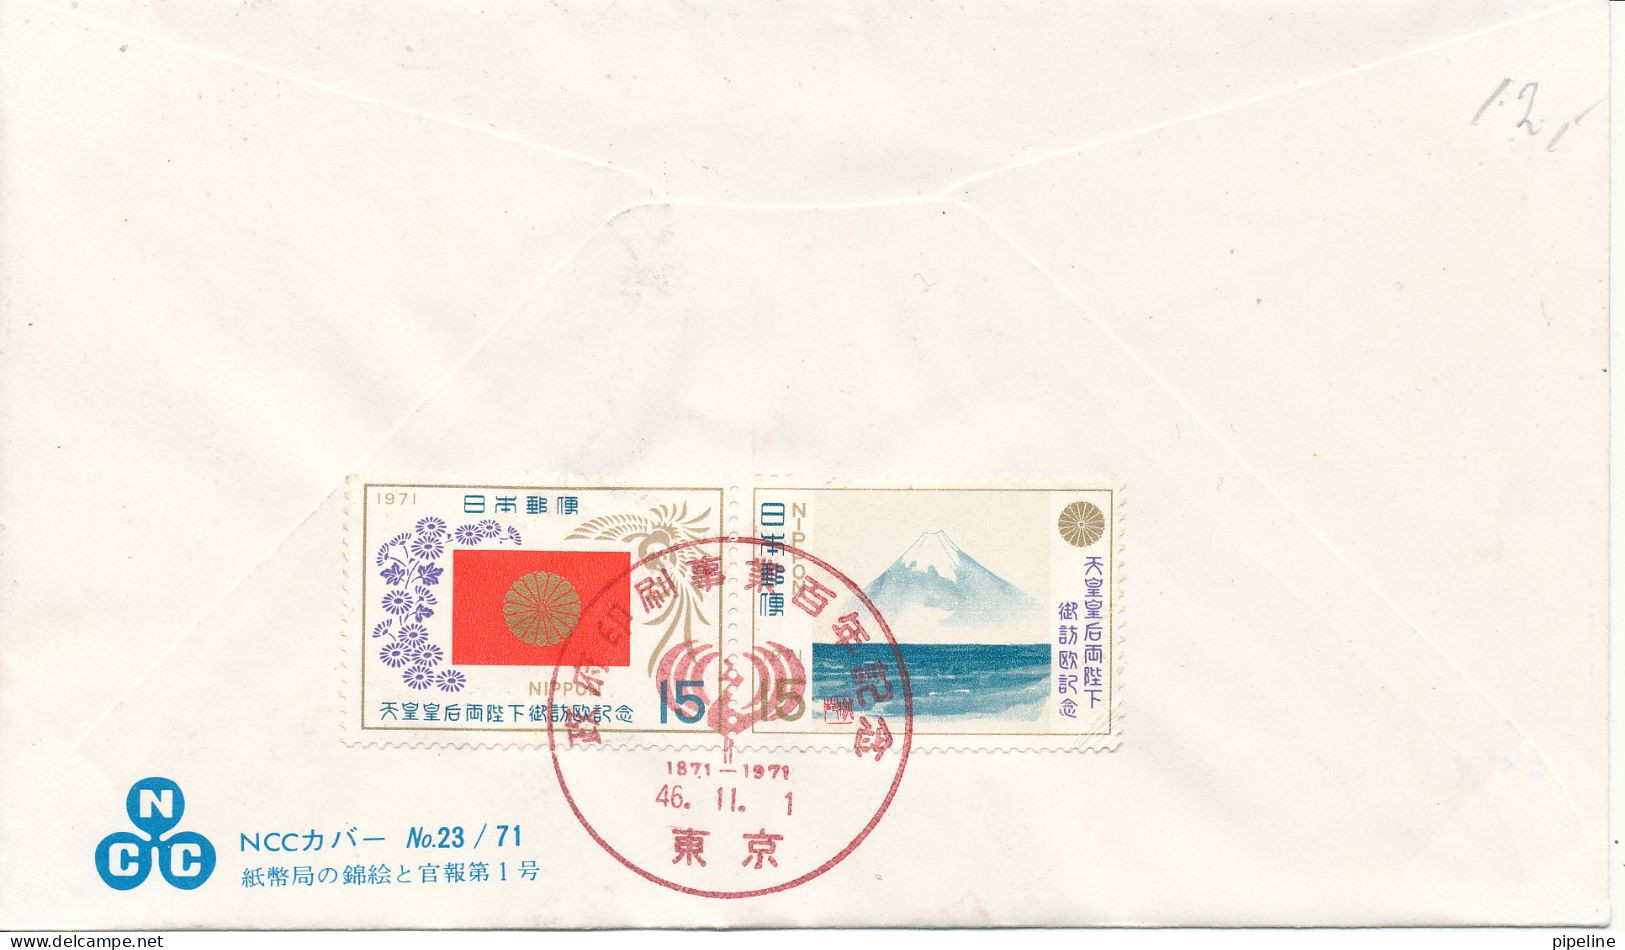 Japan FDC 1-11-1971 Centenary Of Government Printing With Cachet Sent To Denmark Also Stamps On The Backside Of The - FDC